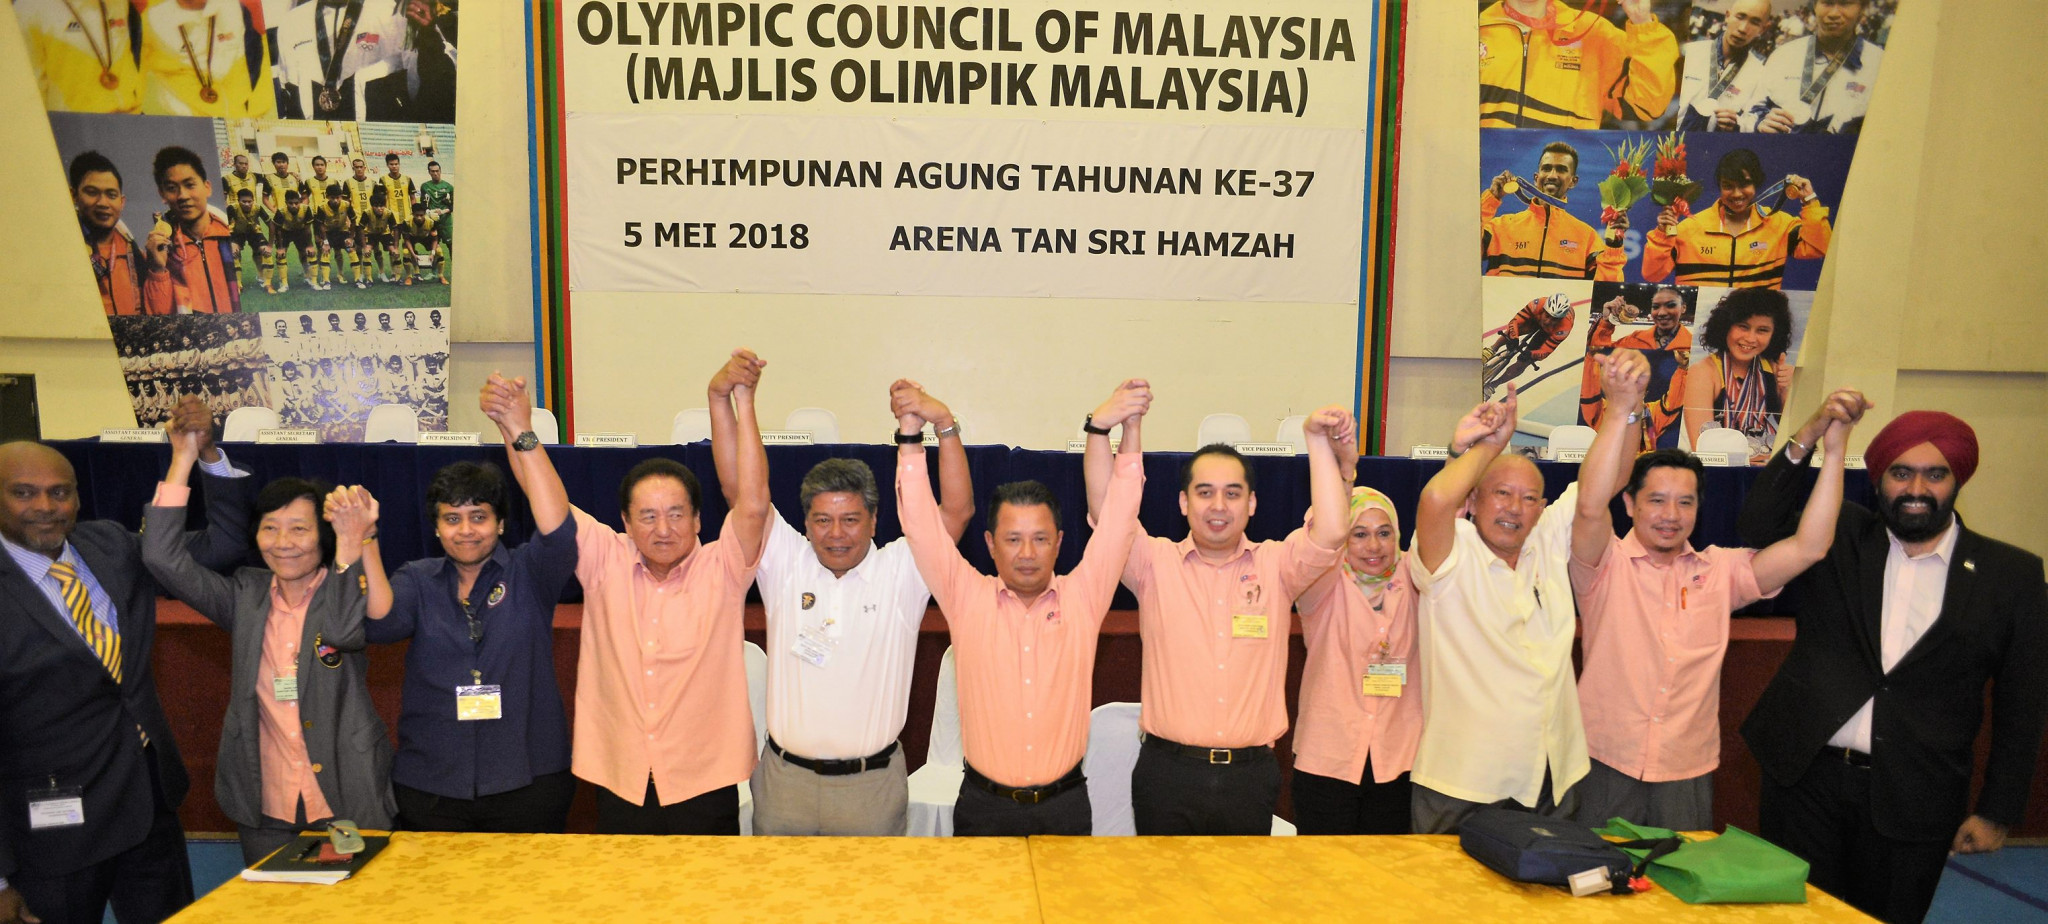 Norza elected Olympic Council of Malaysia President to replace Tunku Imran